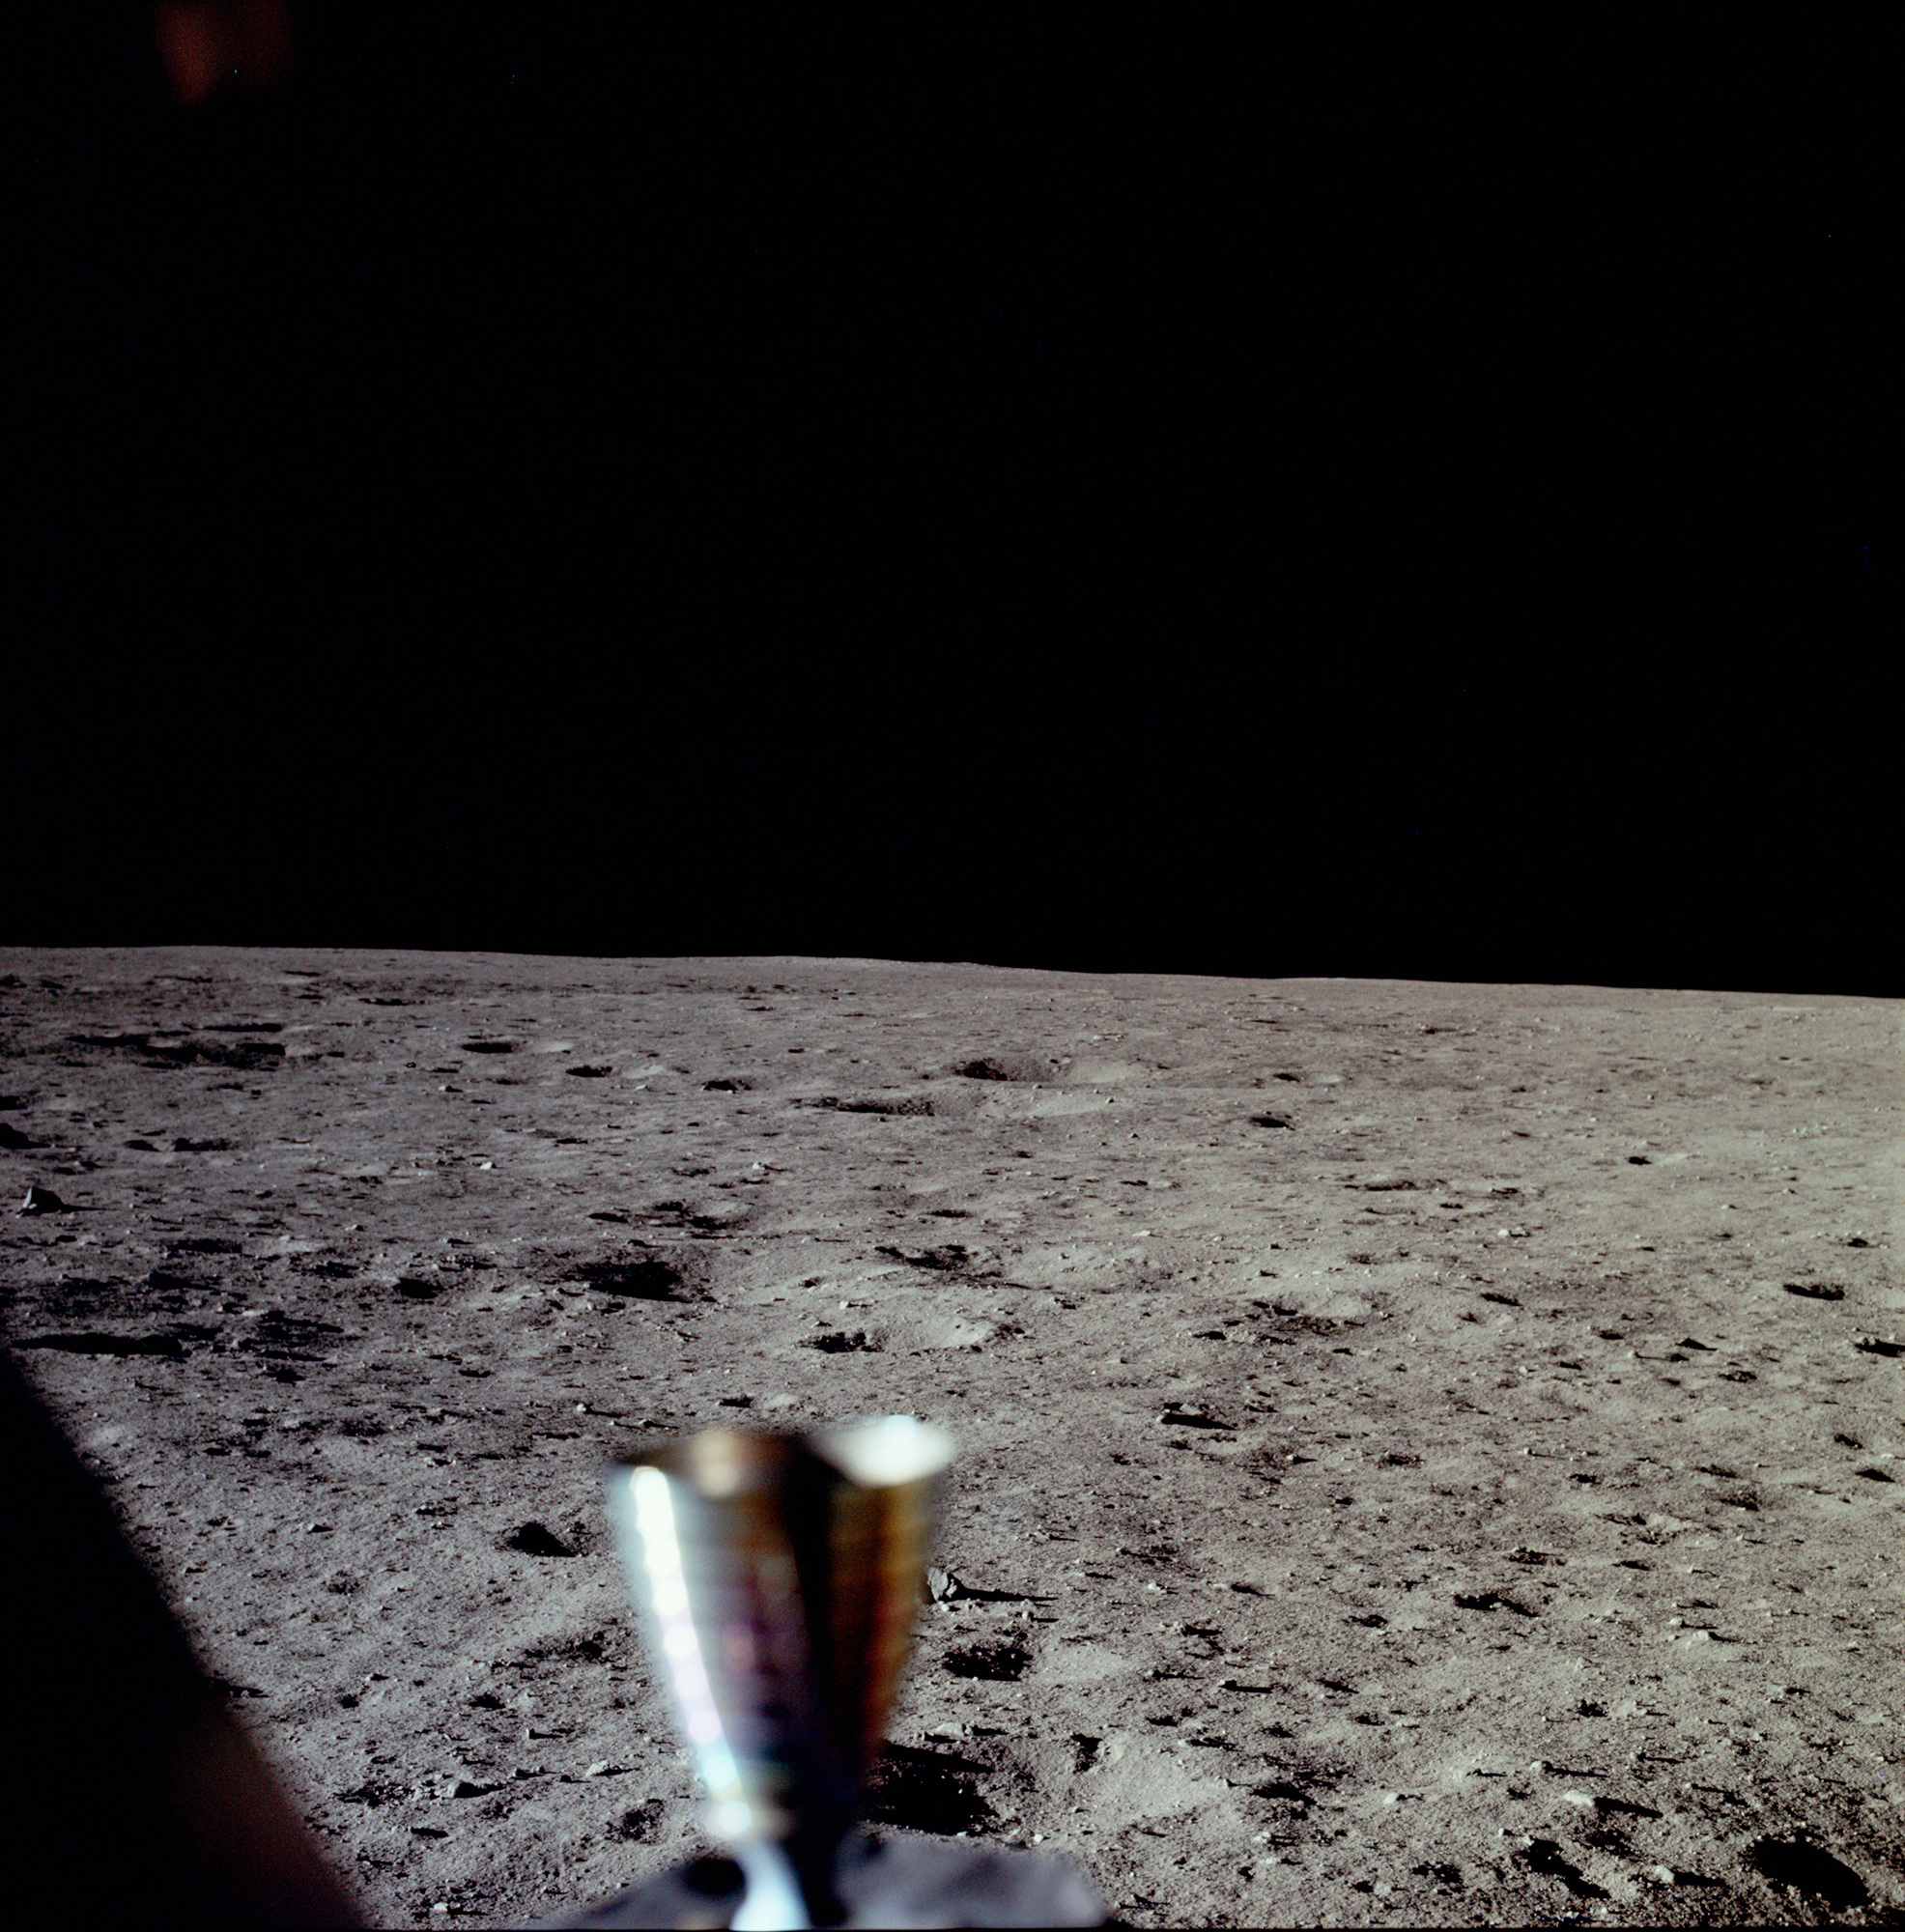 apollo-11-first-photo-on-moon-after-landing.jpg